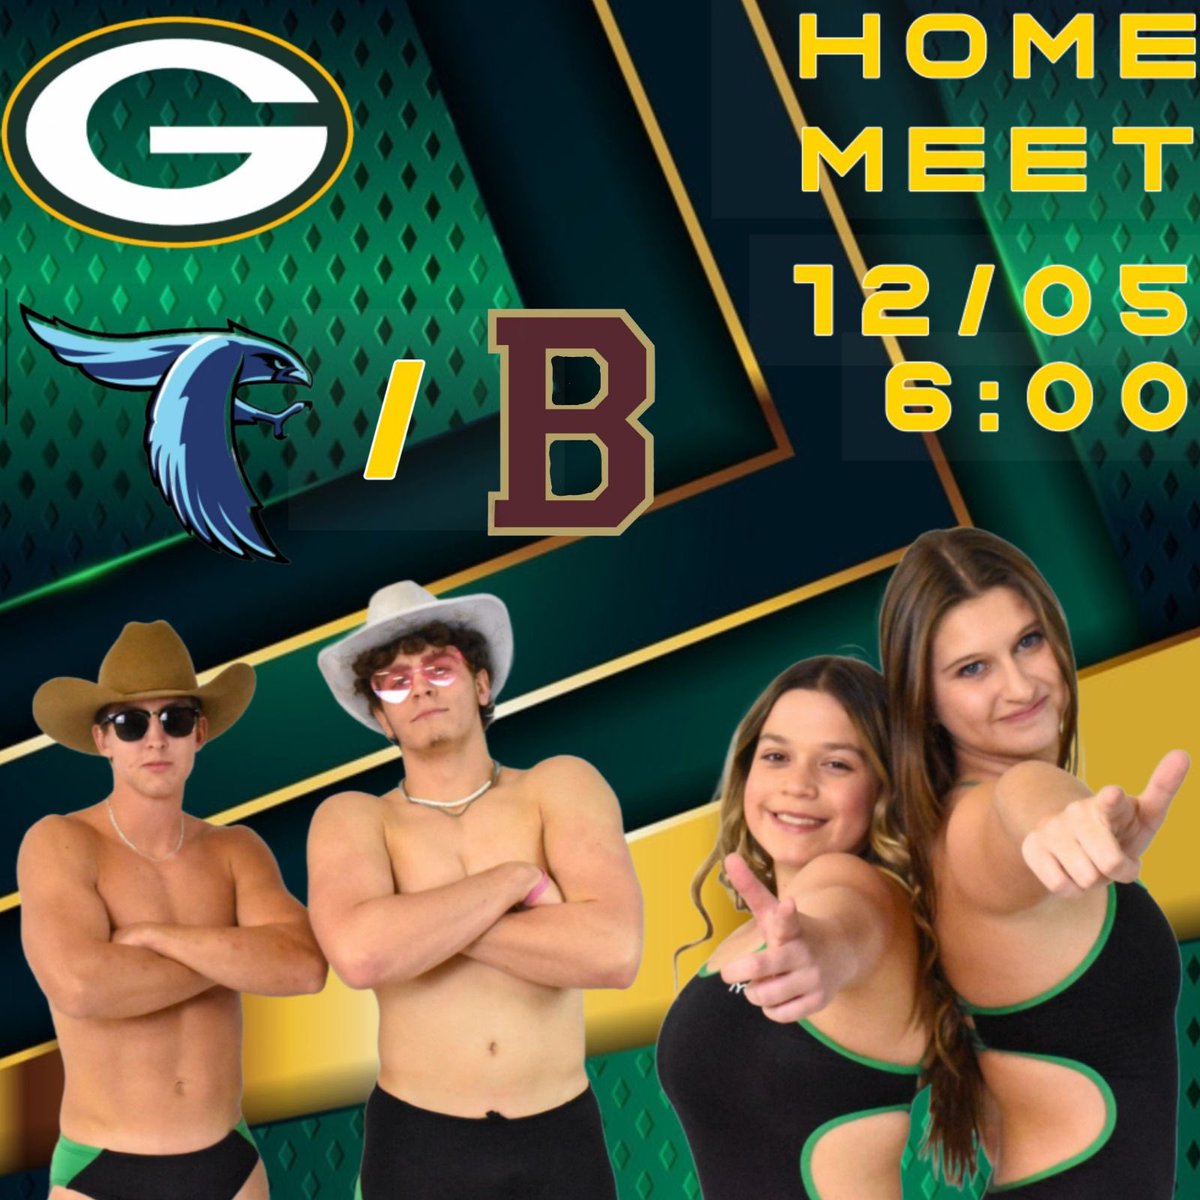 Tonight is our first home meet of the season! Come cheer on your Woodmen and Lady Woodmen as the compete against Perry Meridian and Brebeuf! Meet starts at 6:00pm! #gogreen 💚💛🏊‍♀️🏊‍♂️